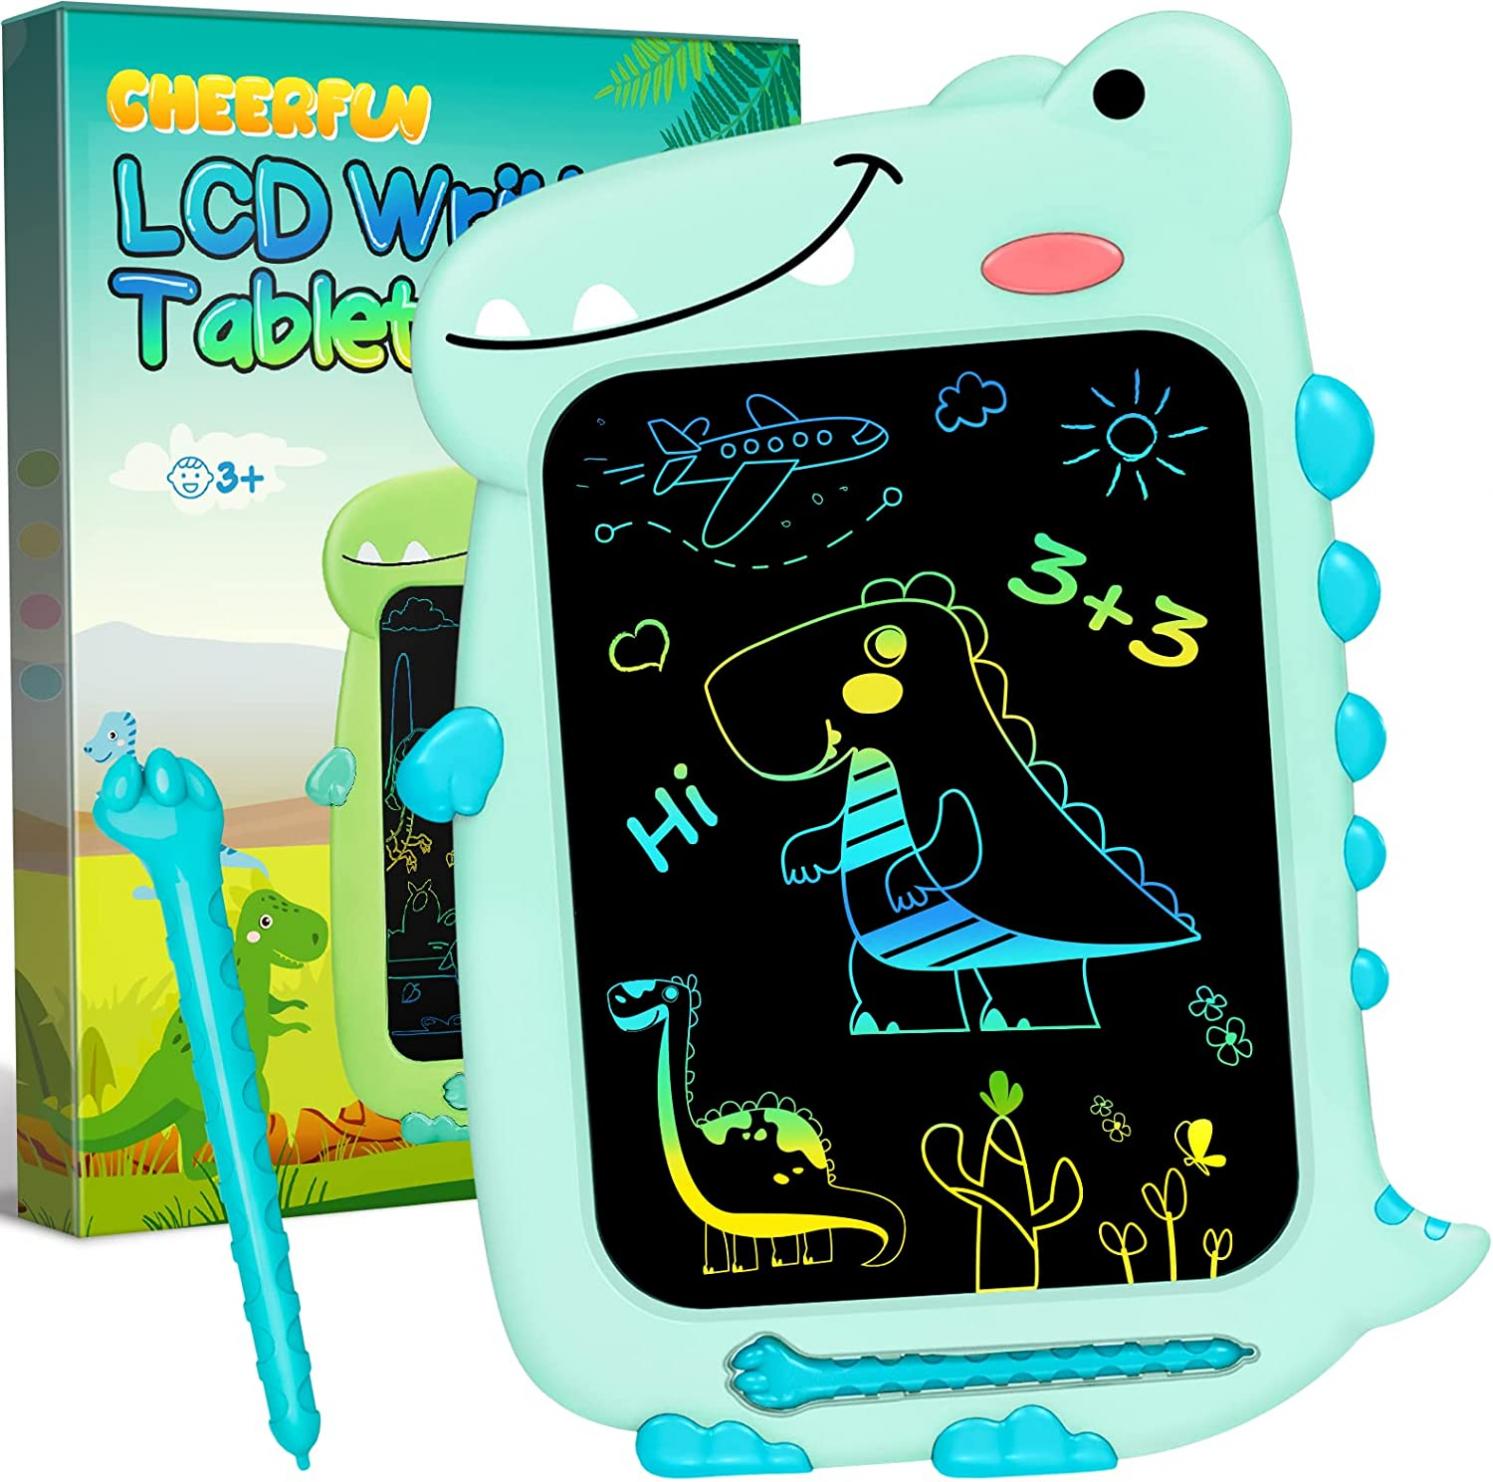 LCD Writing Tablet for Kids Gifts: CHEERFUN Dinosaur Toys for Age 3 4 5 6 7 8 Year Old Boys Girls Christmas Stocking Stuffers Birthday 10-inch Doodle Board Drawing Pad Educational Road Trip Essential